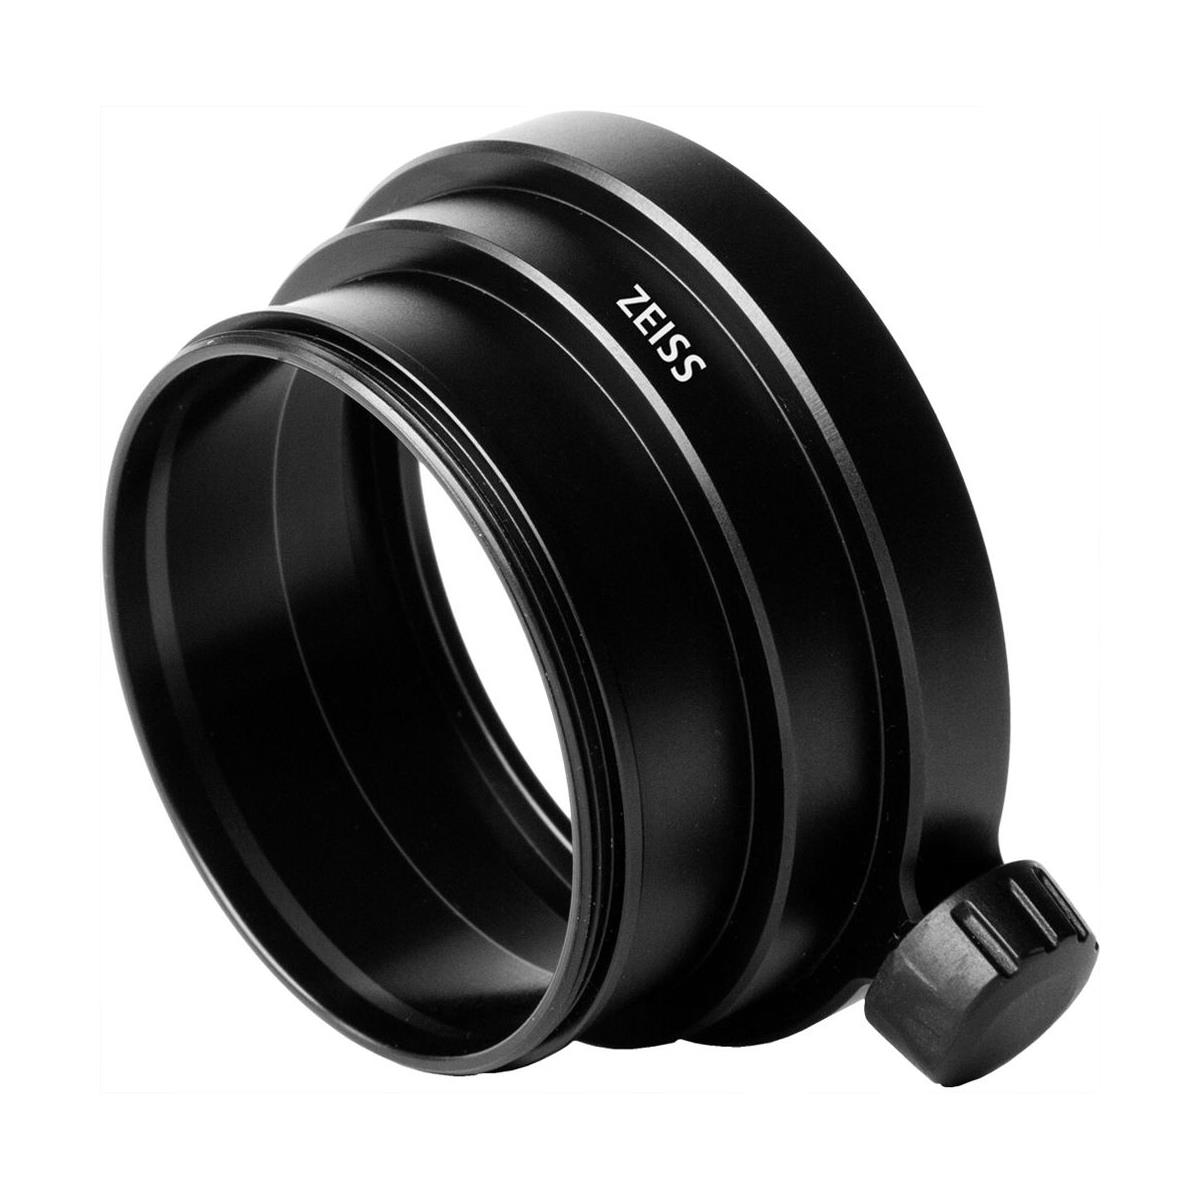 Image of Zeiss M52 Photo Lens Adaptor for Victory Harpia Spotting Scope